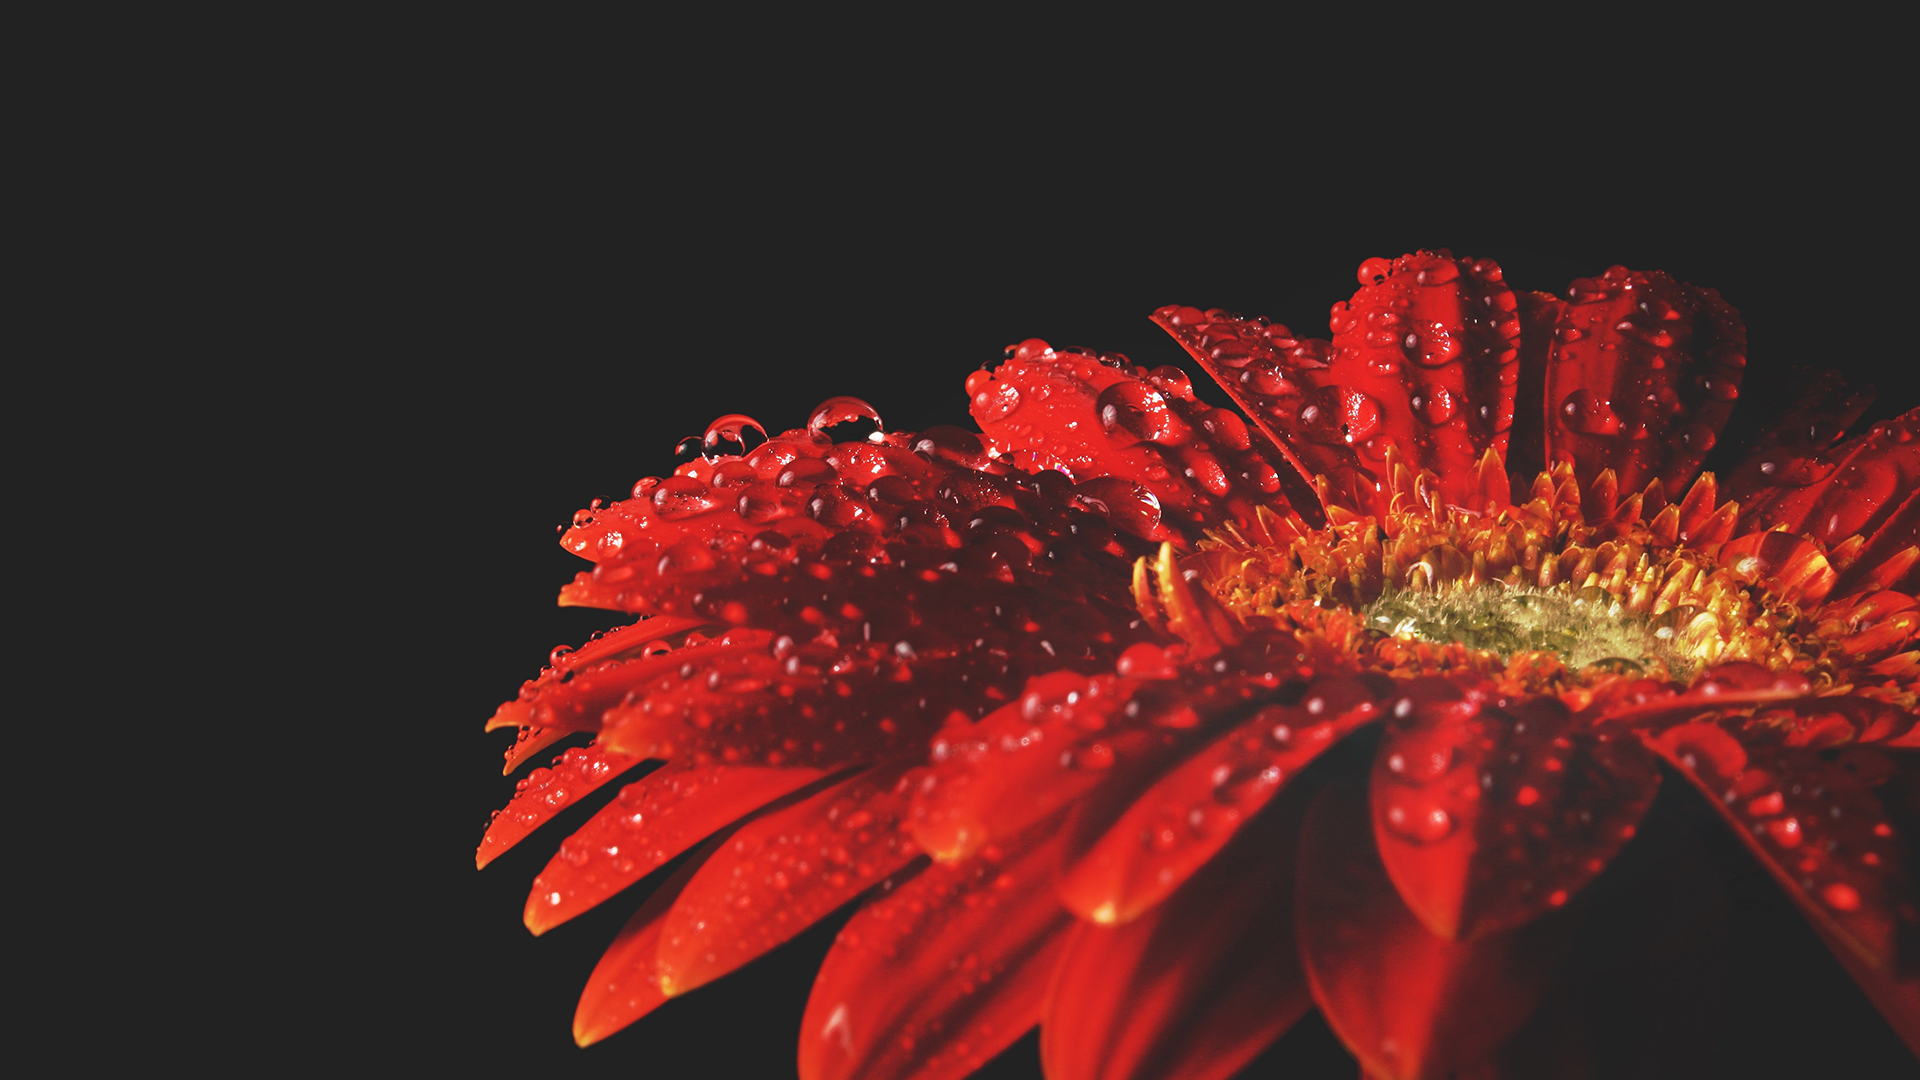 General 1920x1080 nature flowers red flowers water drops simple background